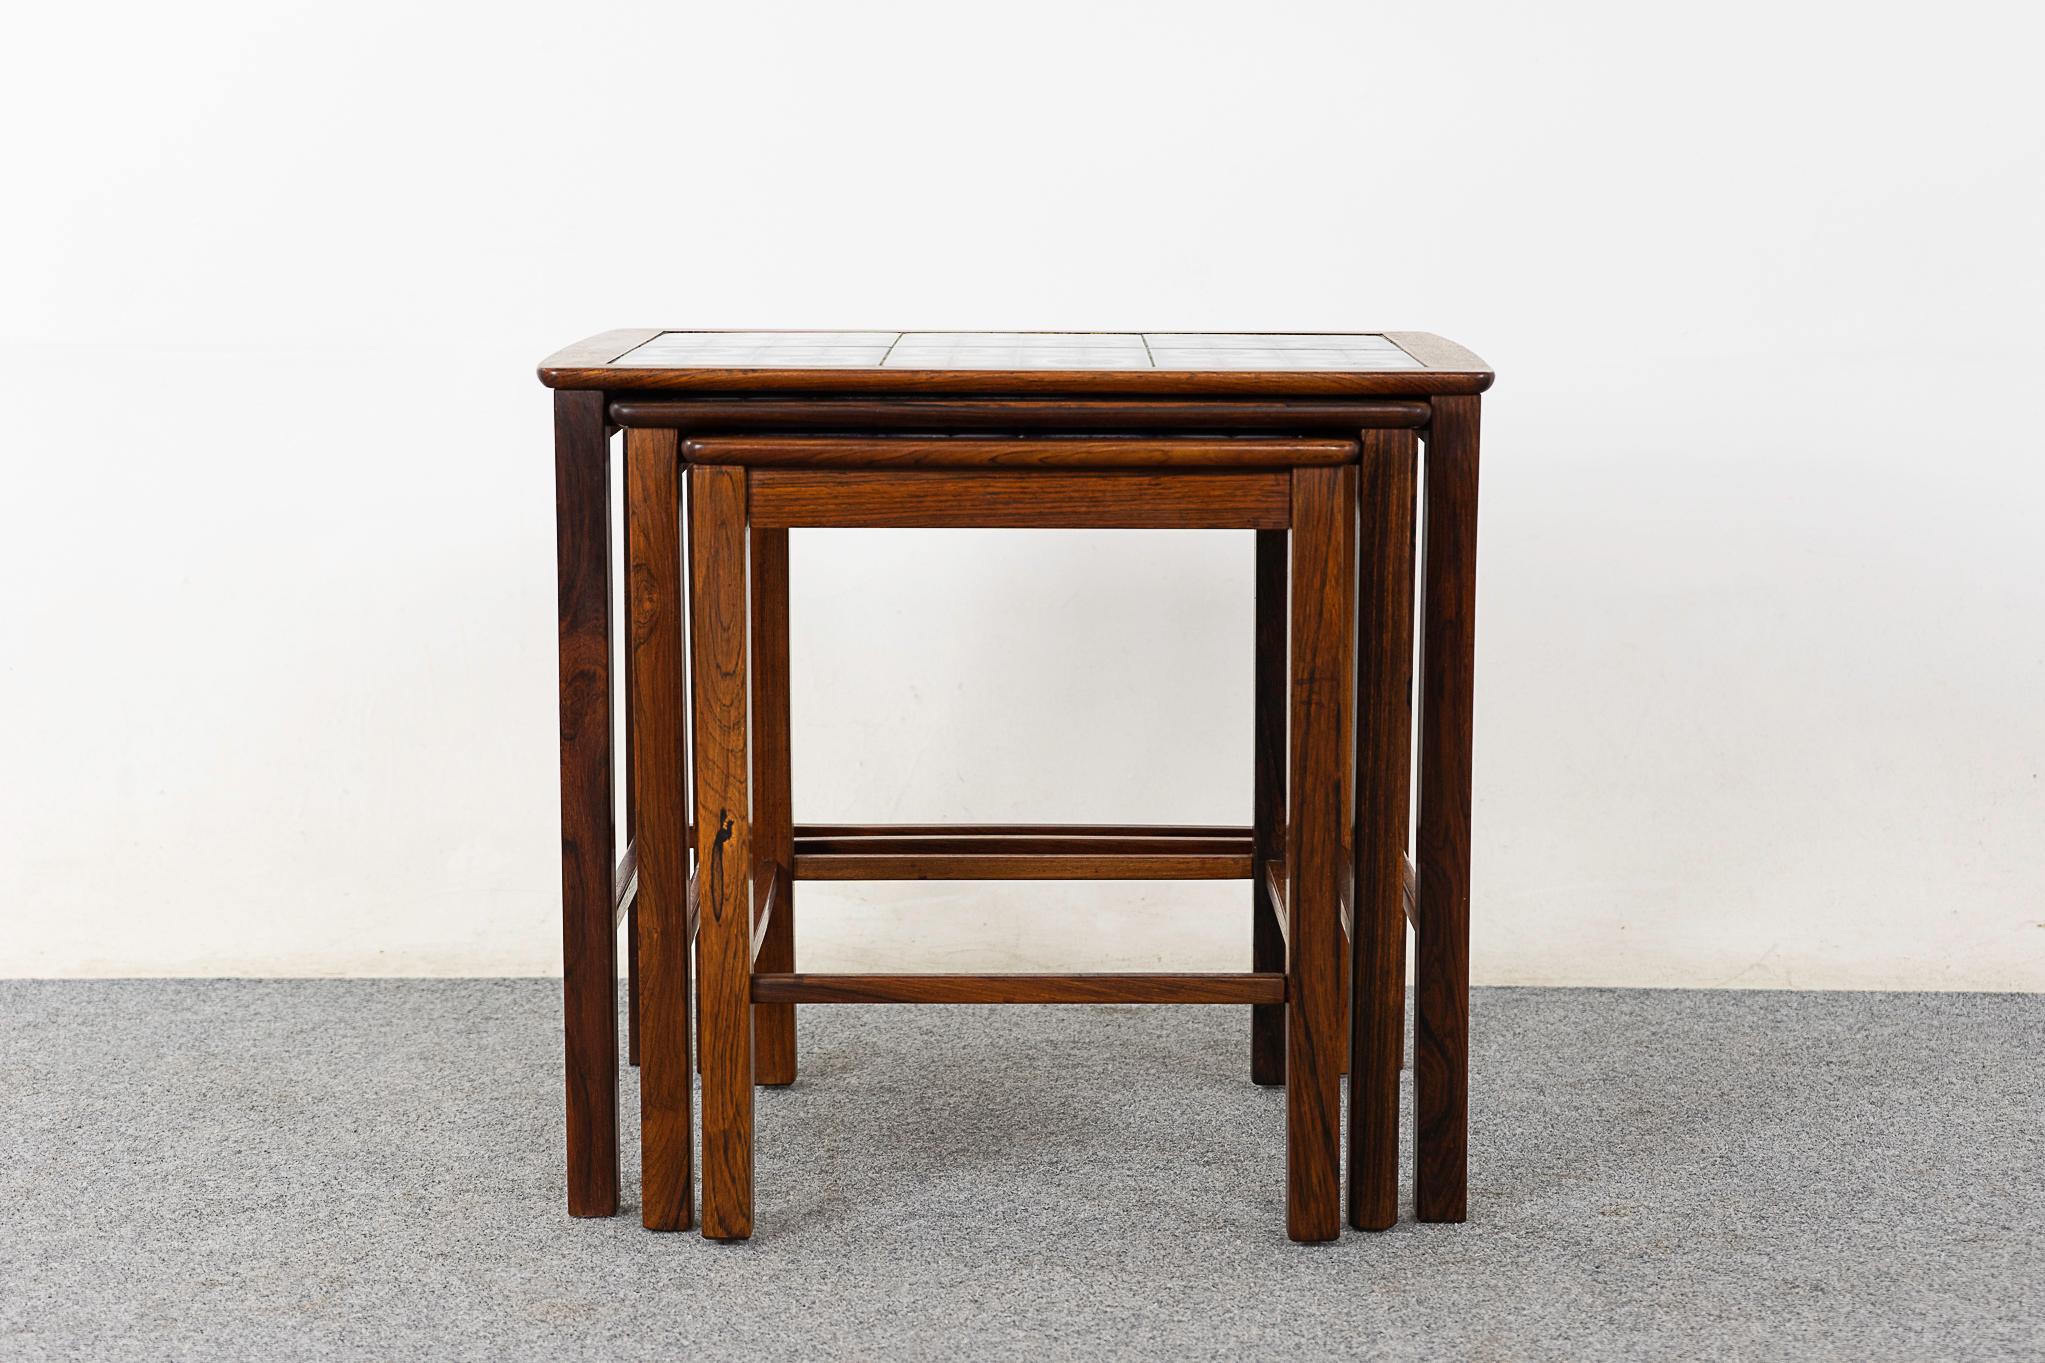 Rosewood & tile mid-century nesting tables, circa 1960's. Charming floral motif tiled tops, framed in stunning rosewood. Space saving design, footprint of one table with the functionality of three! 

Unrestored item, some marks consistent with age.